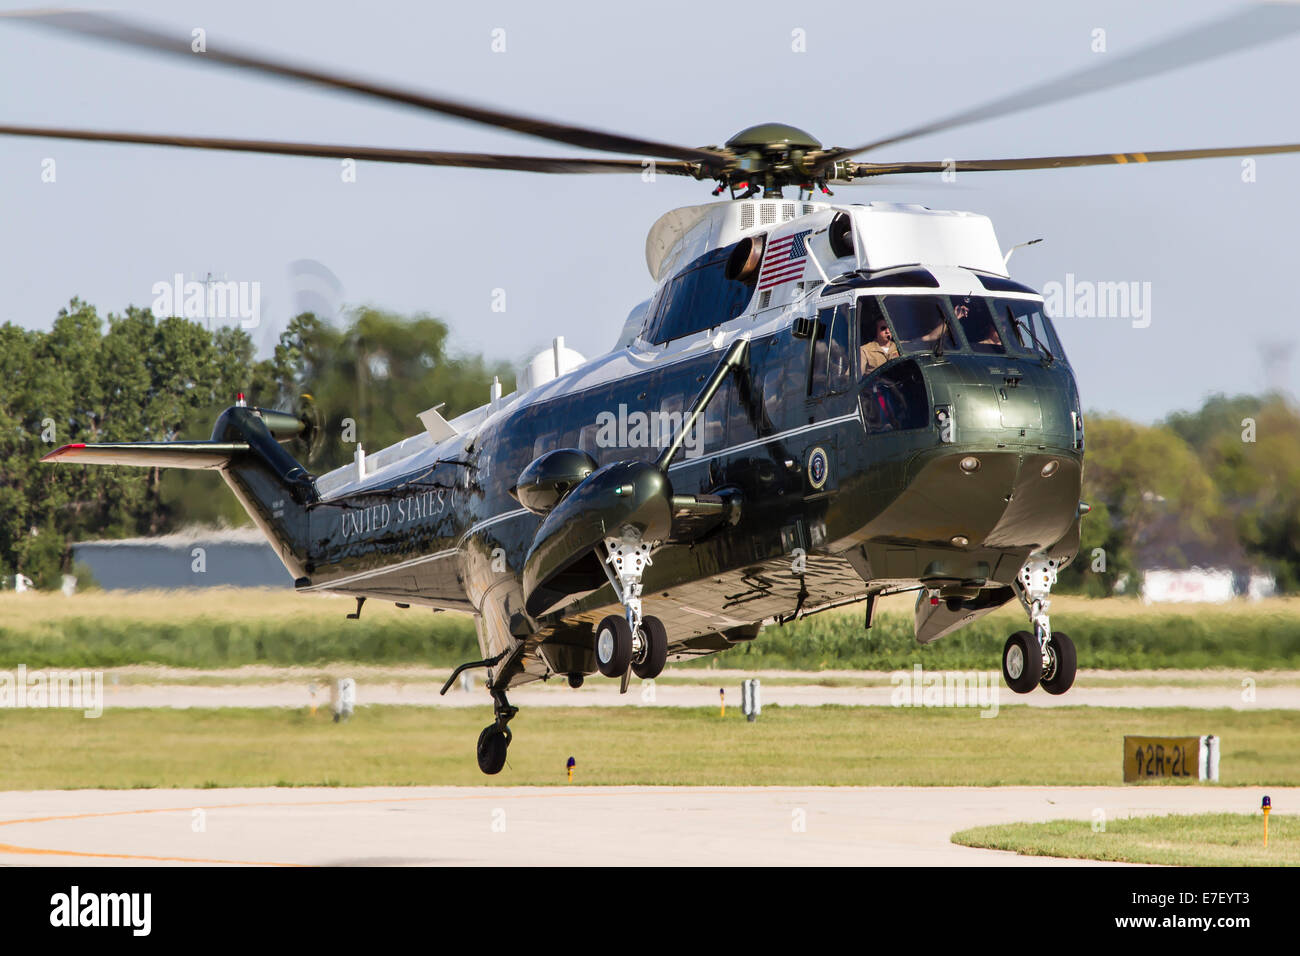 A U.S. Marine Corps VH-3D transport helicopter lands at DuPage County Airport, Illinois. Stock Photo